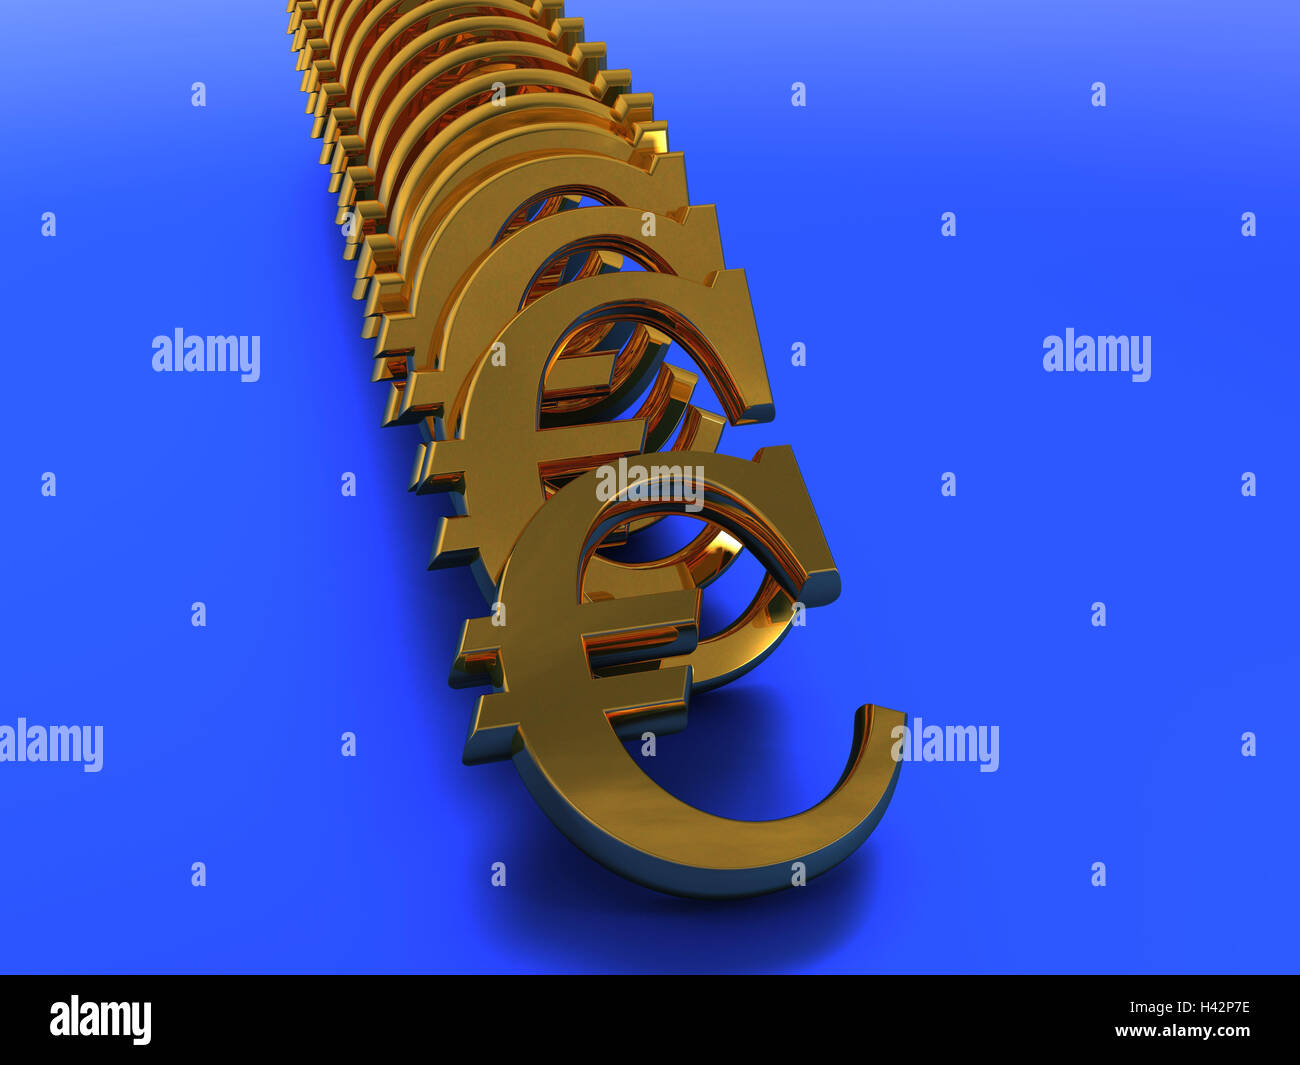 Eurocharacters, golden, several, fall down, euroicons, euro, 'dominos', fall, lie, currency, money, finances, fall, crash, exchange rate expiration, chain reaction, domino effect, economy, cash value, gilds, cut out, Stock Photo